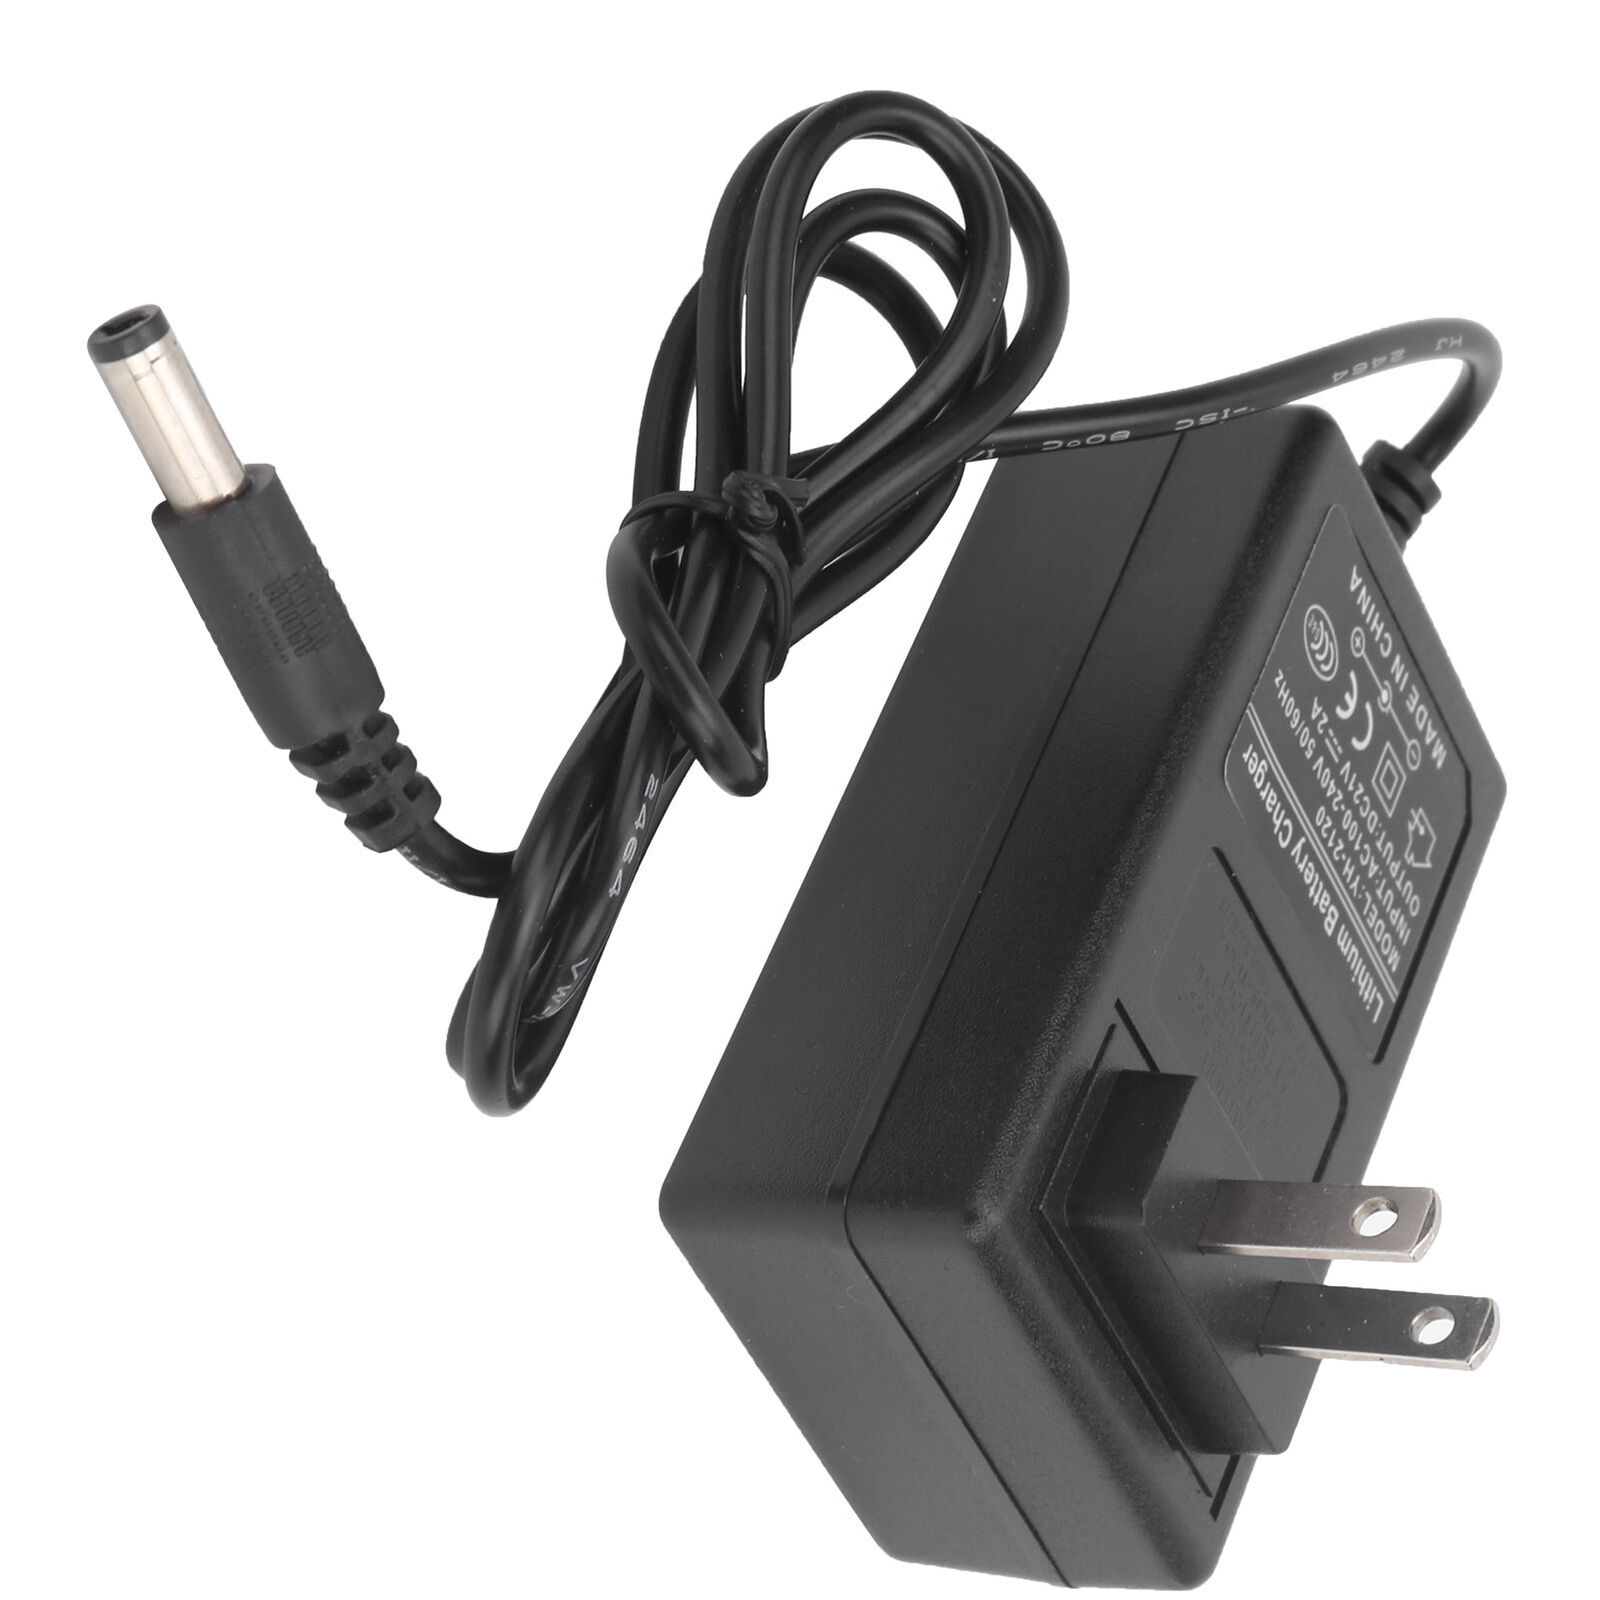 AC Adapter for Deerma VC20 VC21 VC20 Plus Cordless Vacuum Cleaner Power Charger Type AC/AC Adapter Brand Deerma MPN